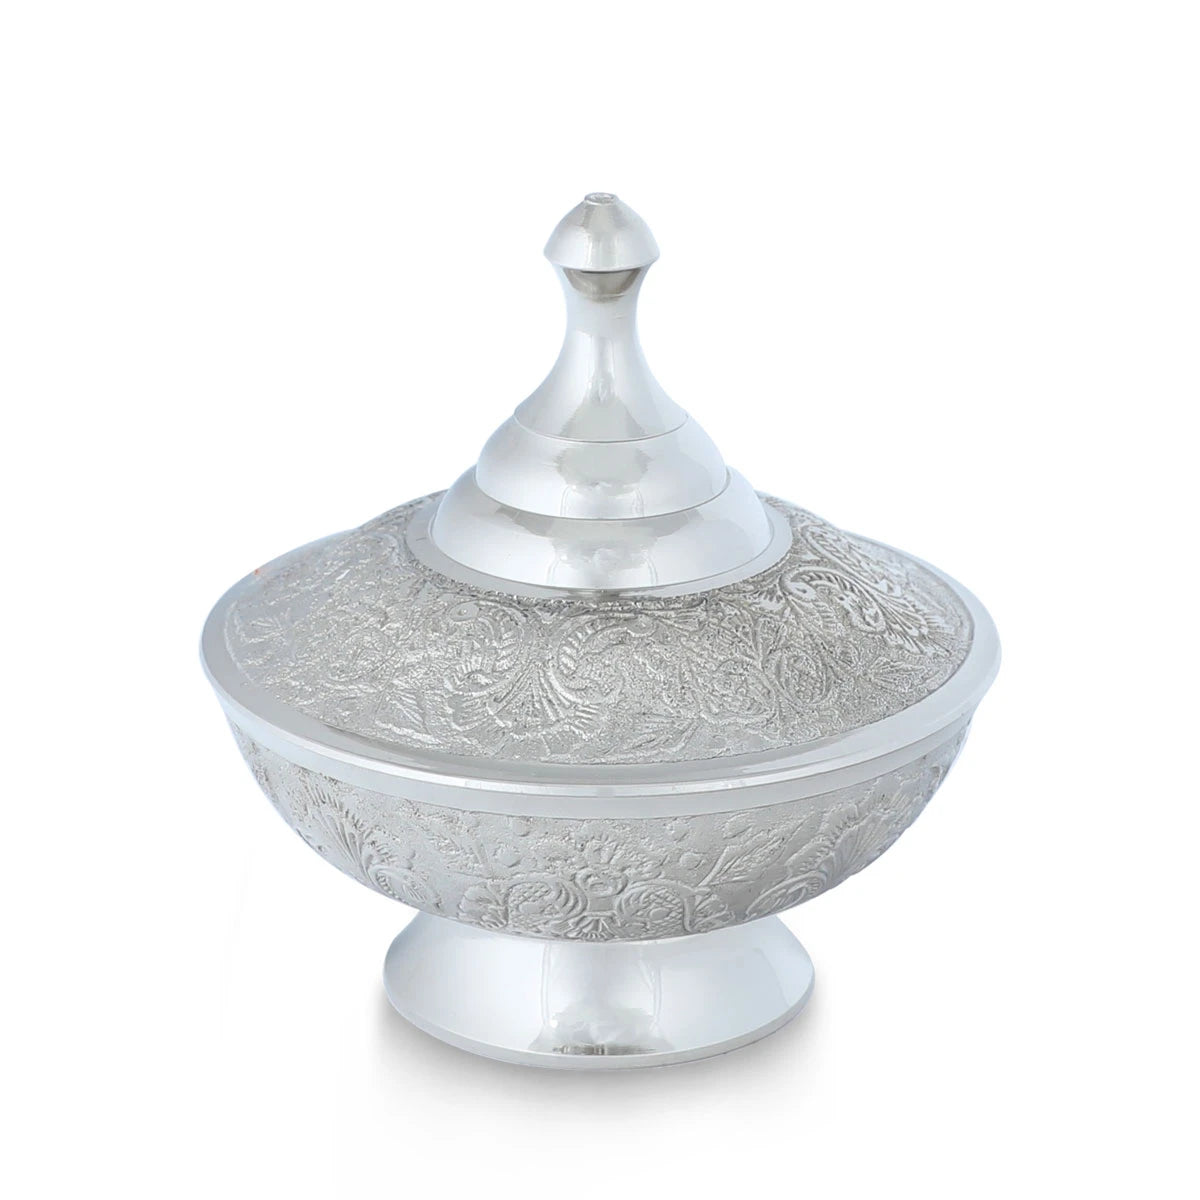 Front View of Floral Decor Silver Colored Brass Metal Bowl 